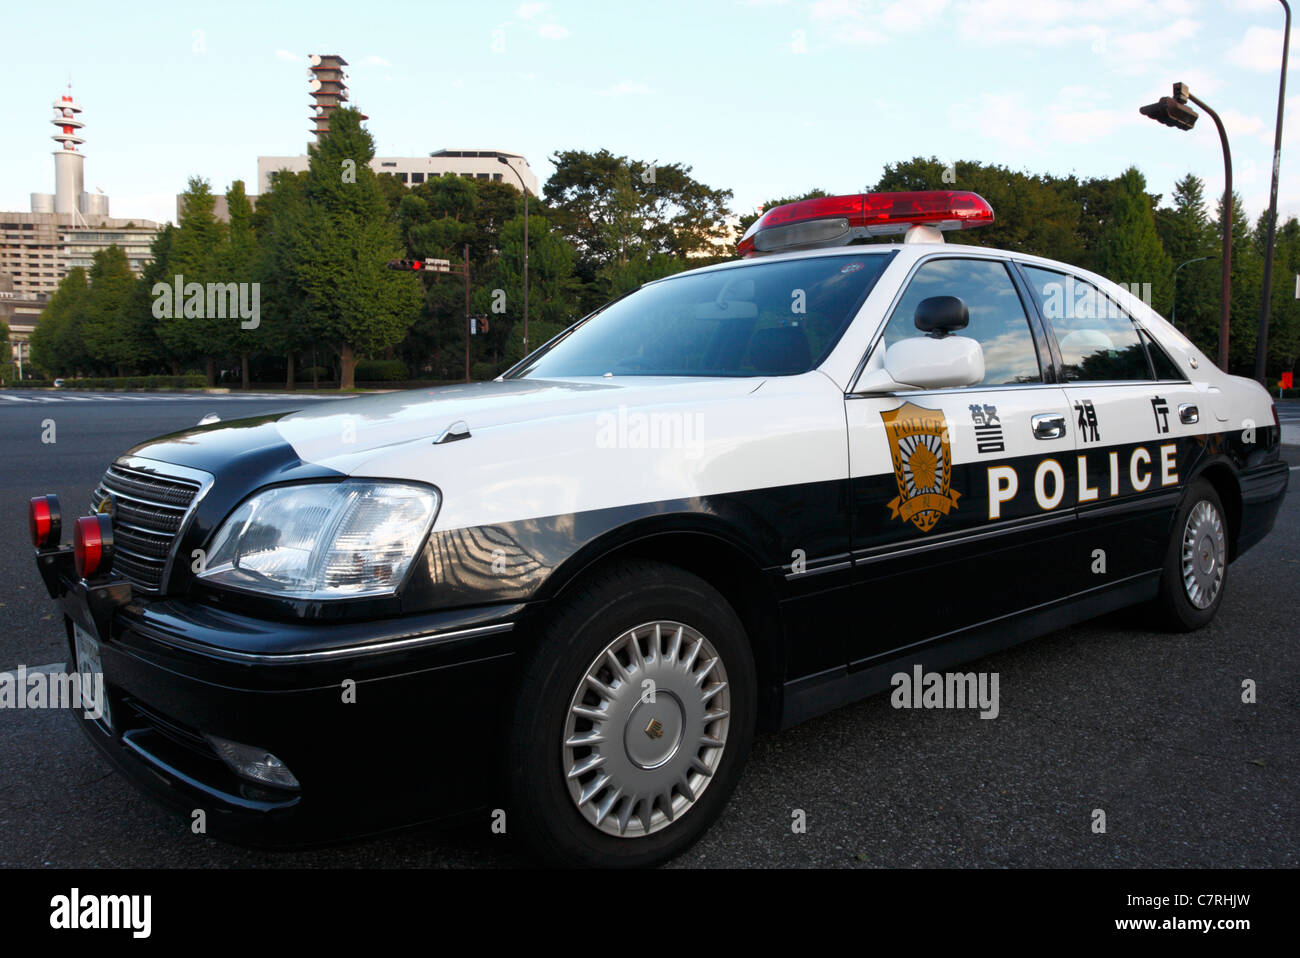 TOKYO - SEPTEMBER 23: Close-up of a Japanese police car on September 23, 2011 in Tokyo. Stock Photo